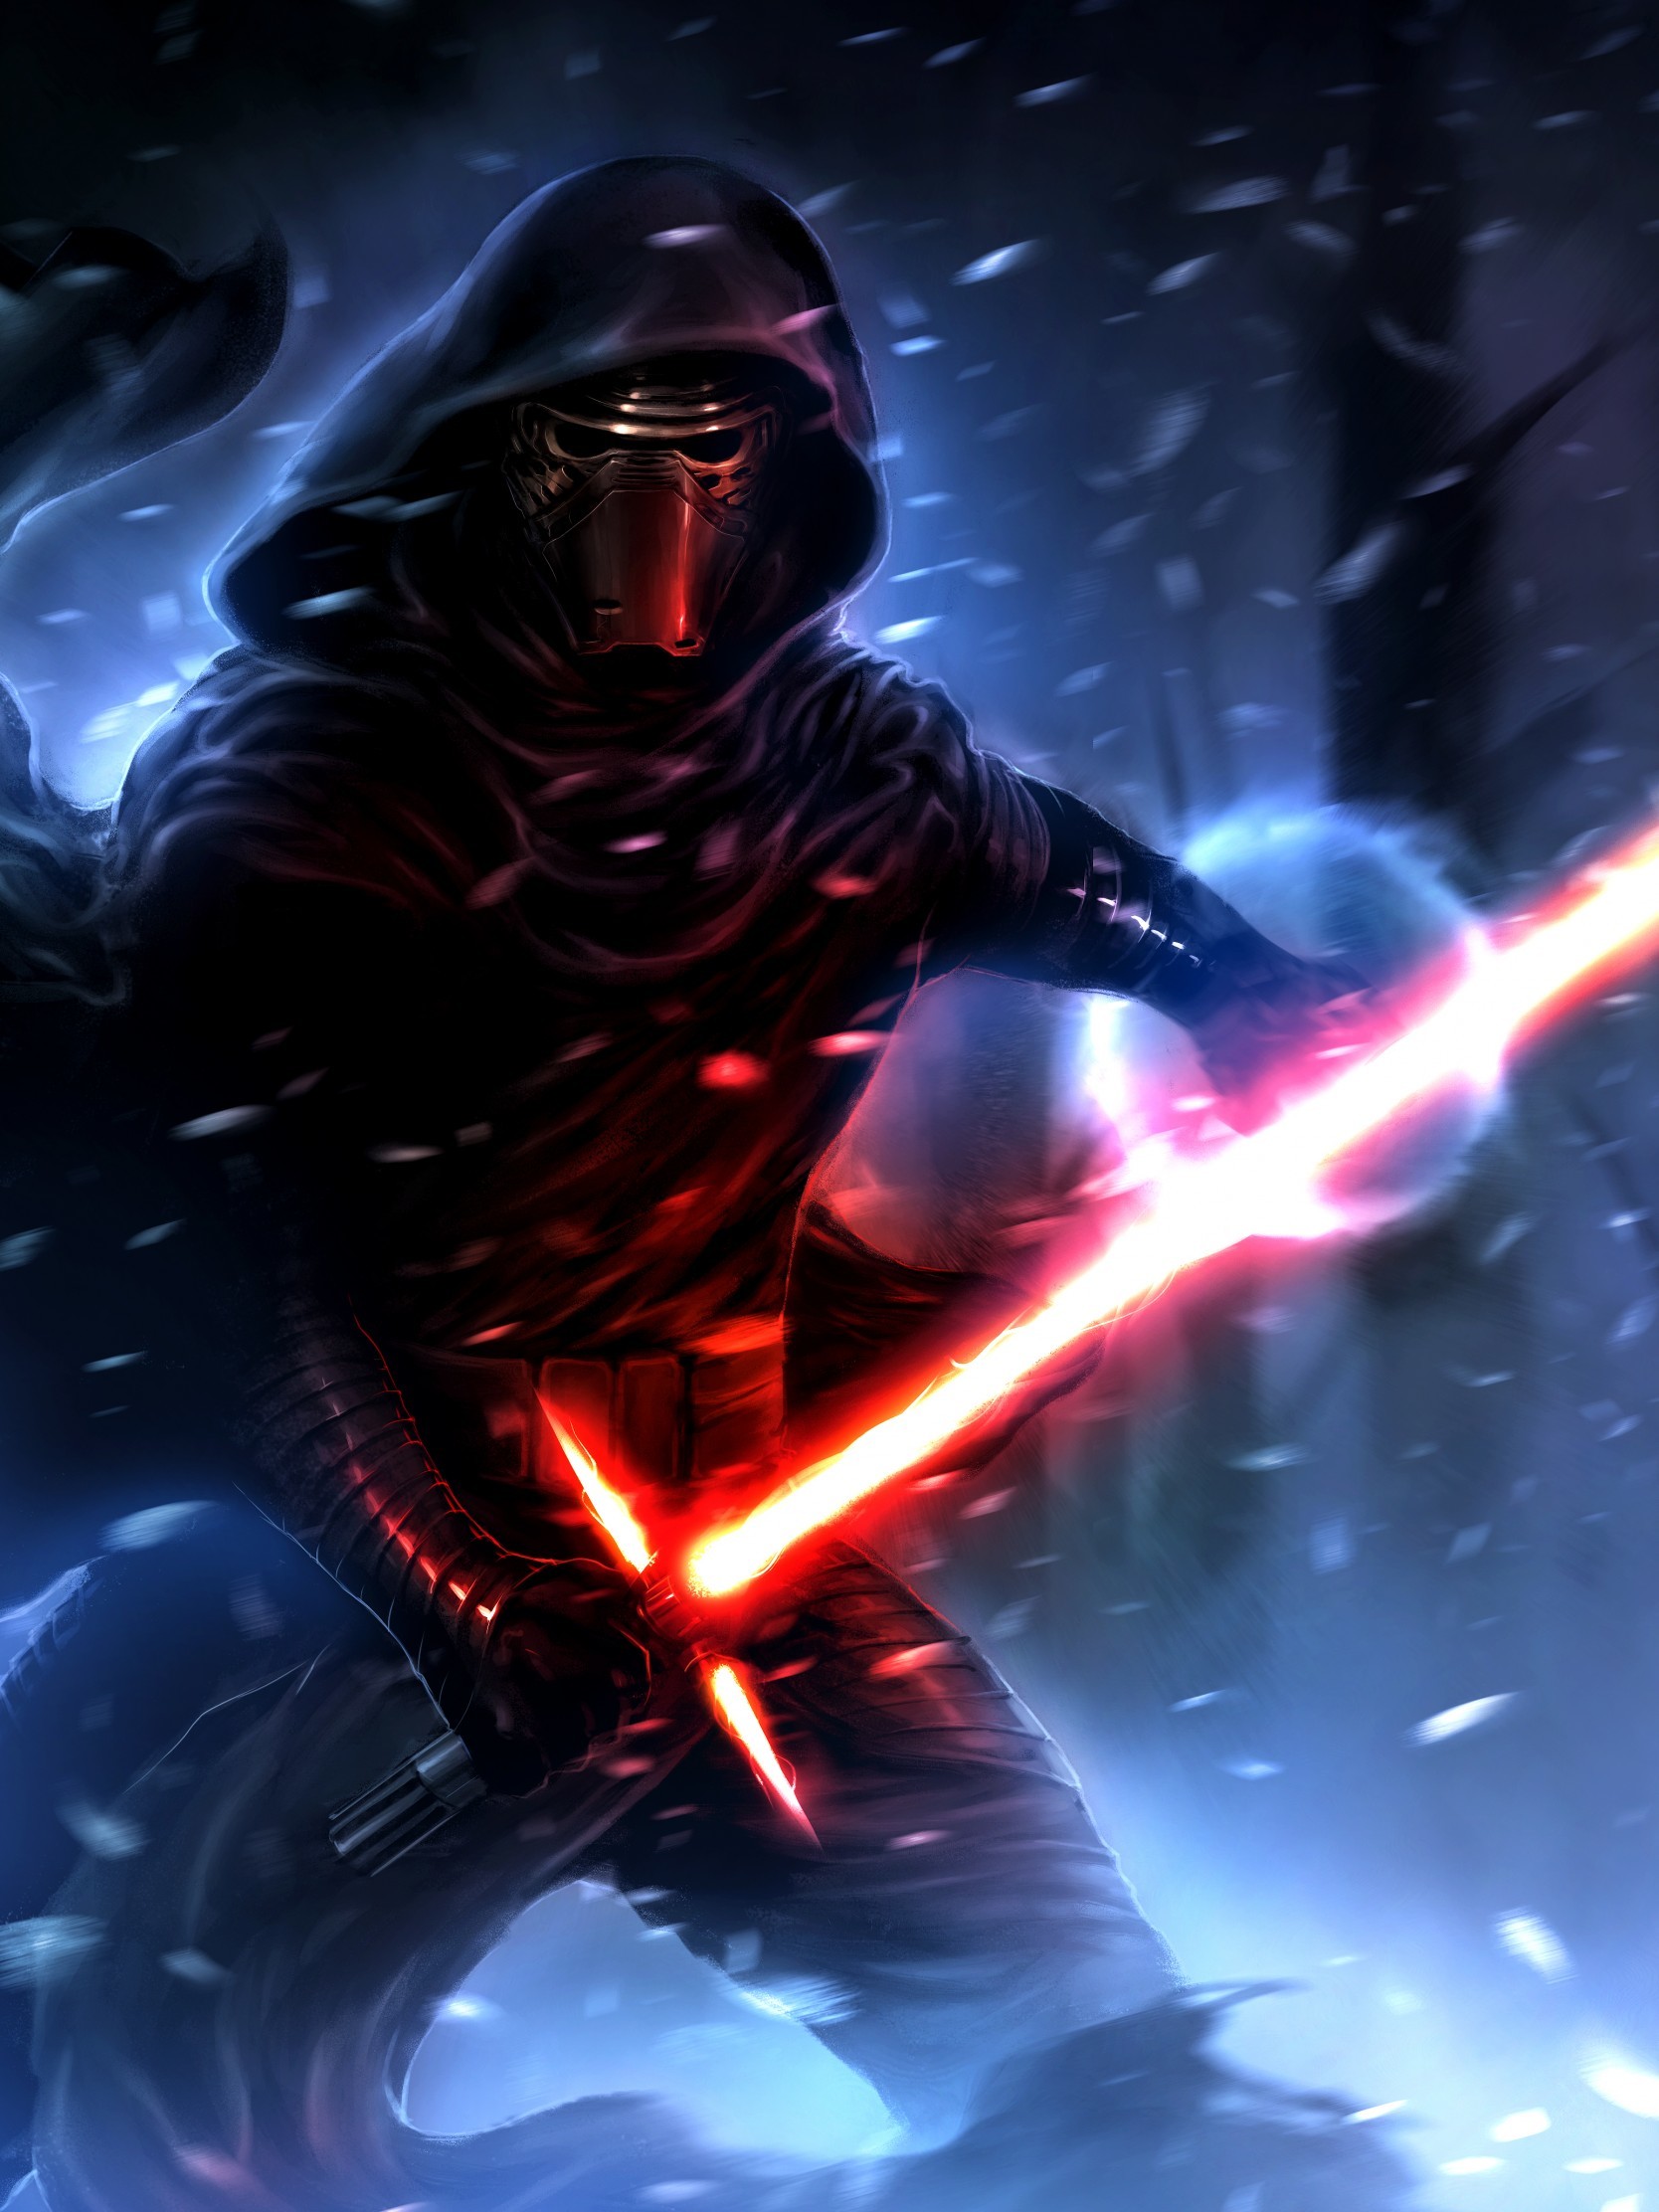 Sith Lord Wallpaper.